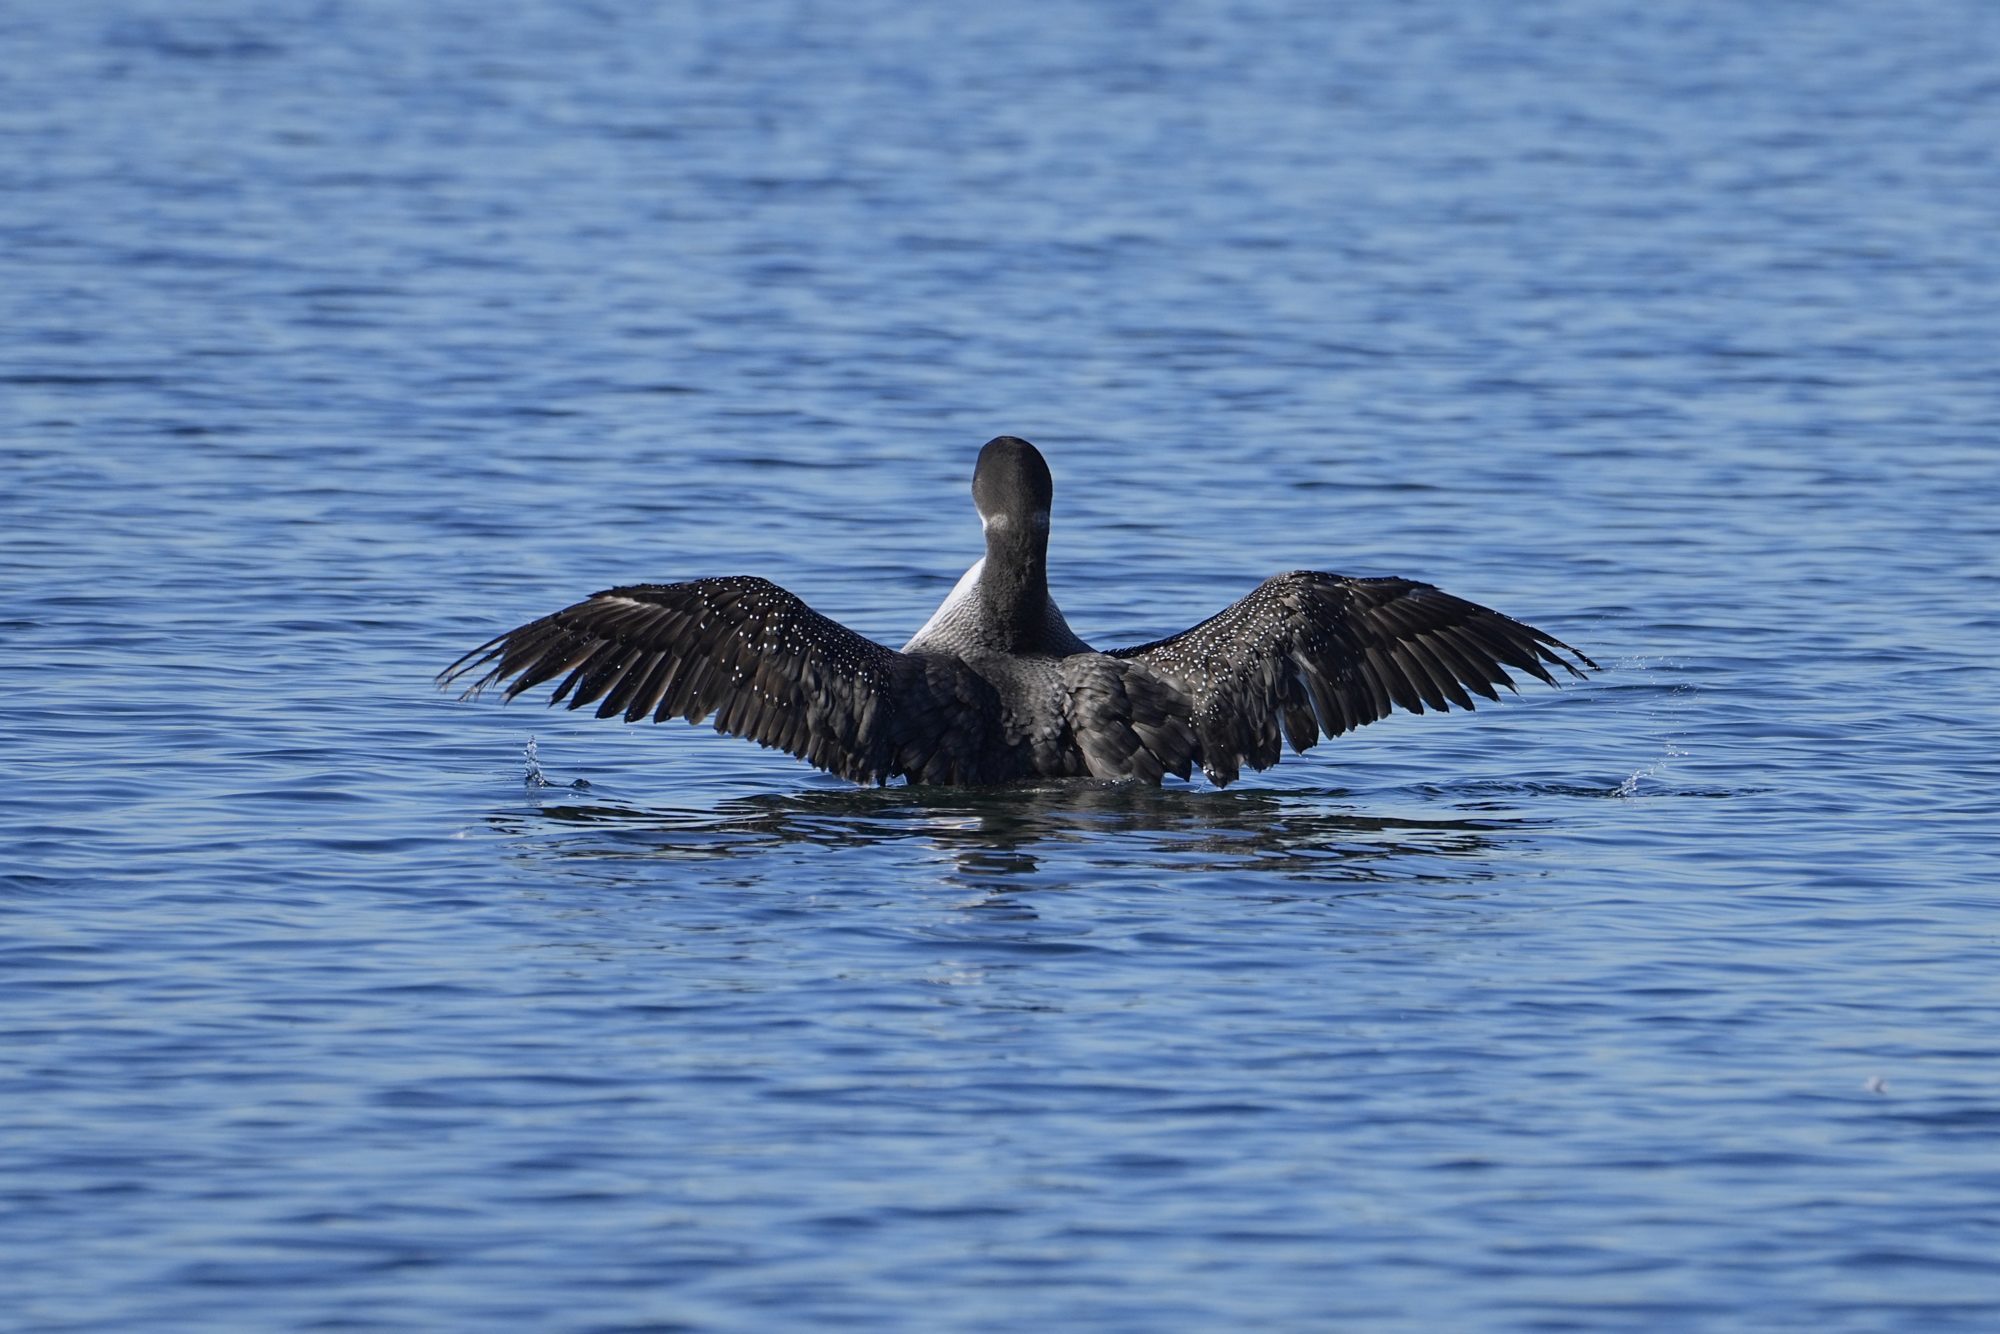 A Common Loon is on the water, flapping its wings. It is facing away from us